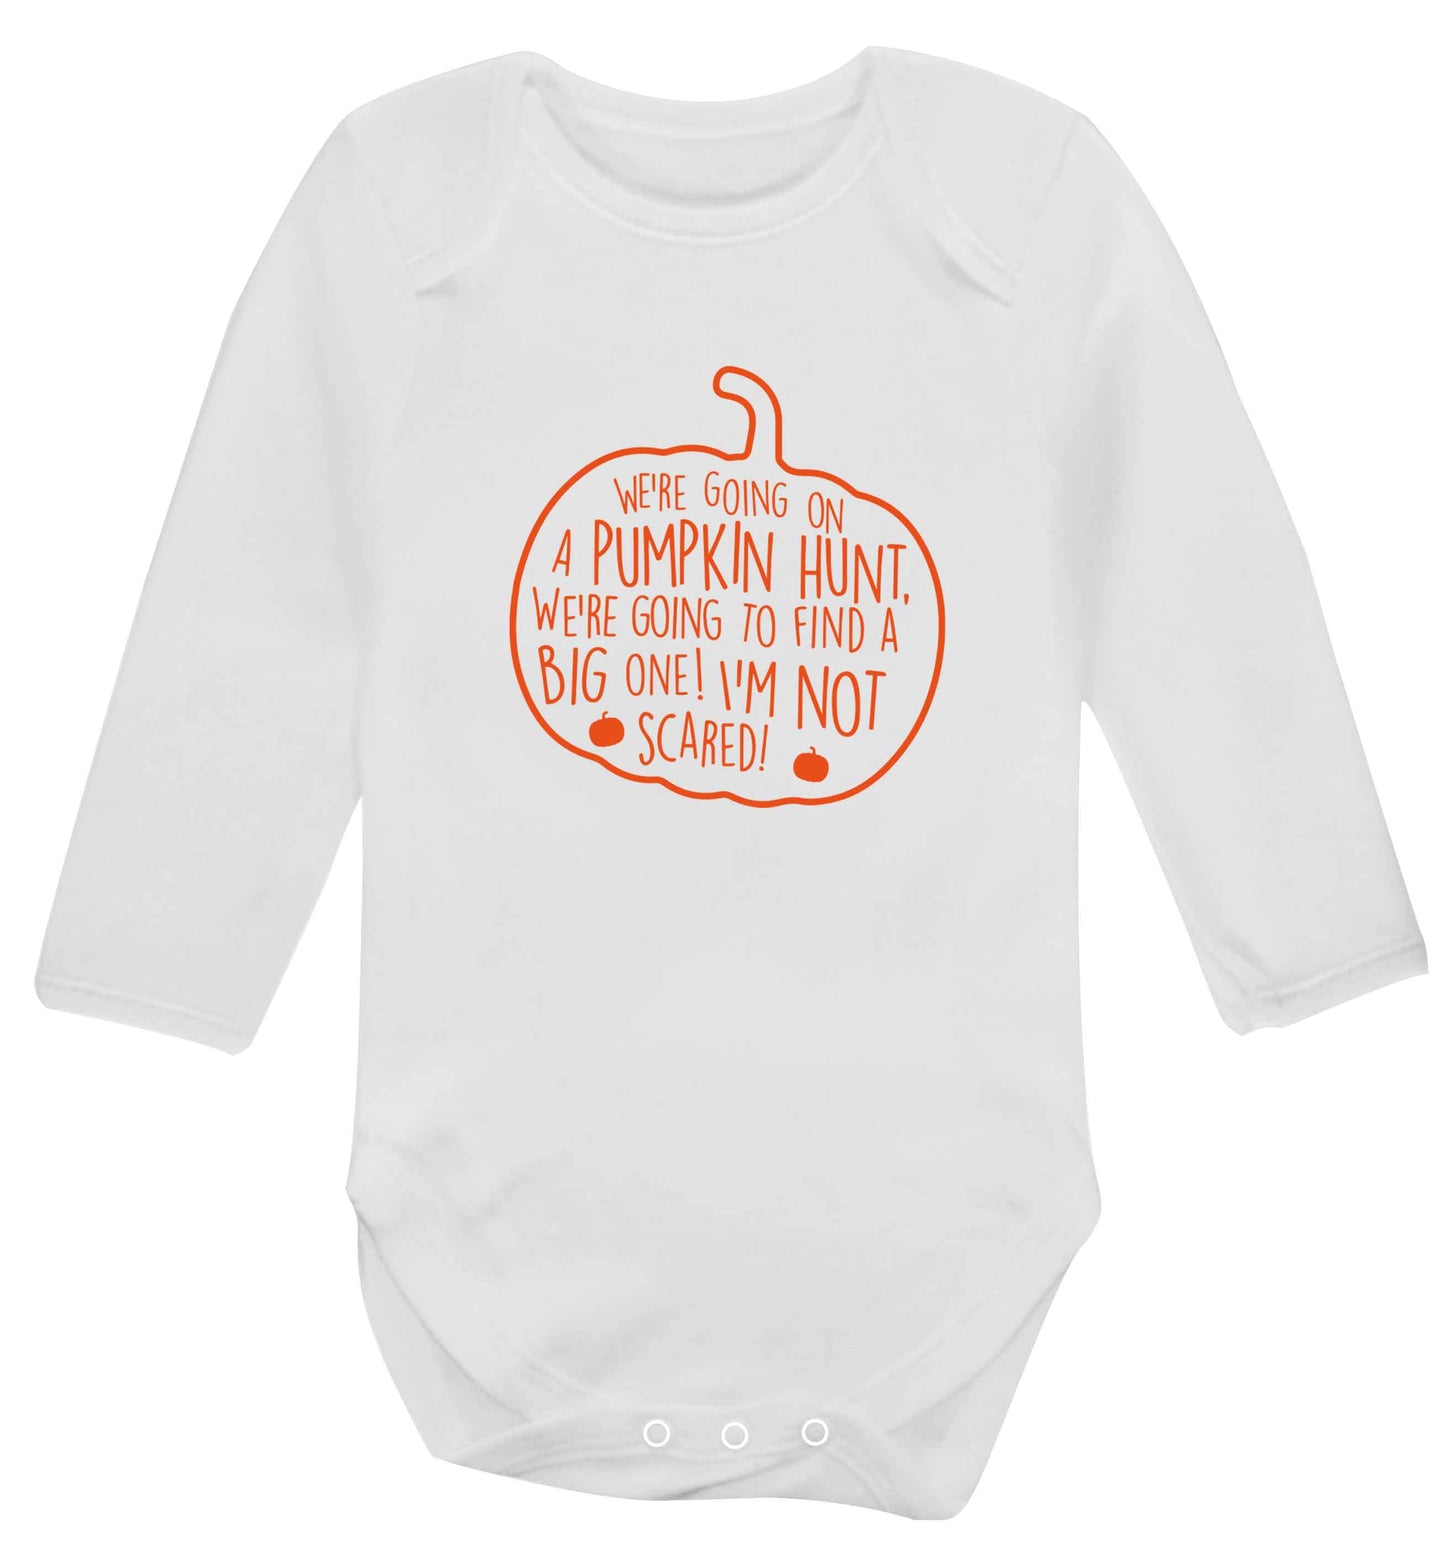 We're going on a pumpkin hunt baby vest long sleeved white 6-12 months